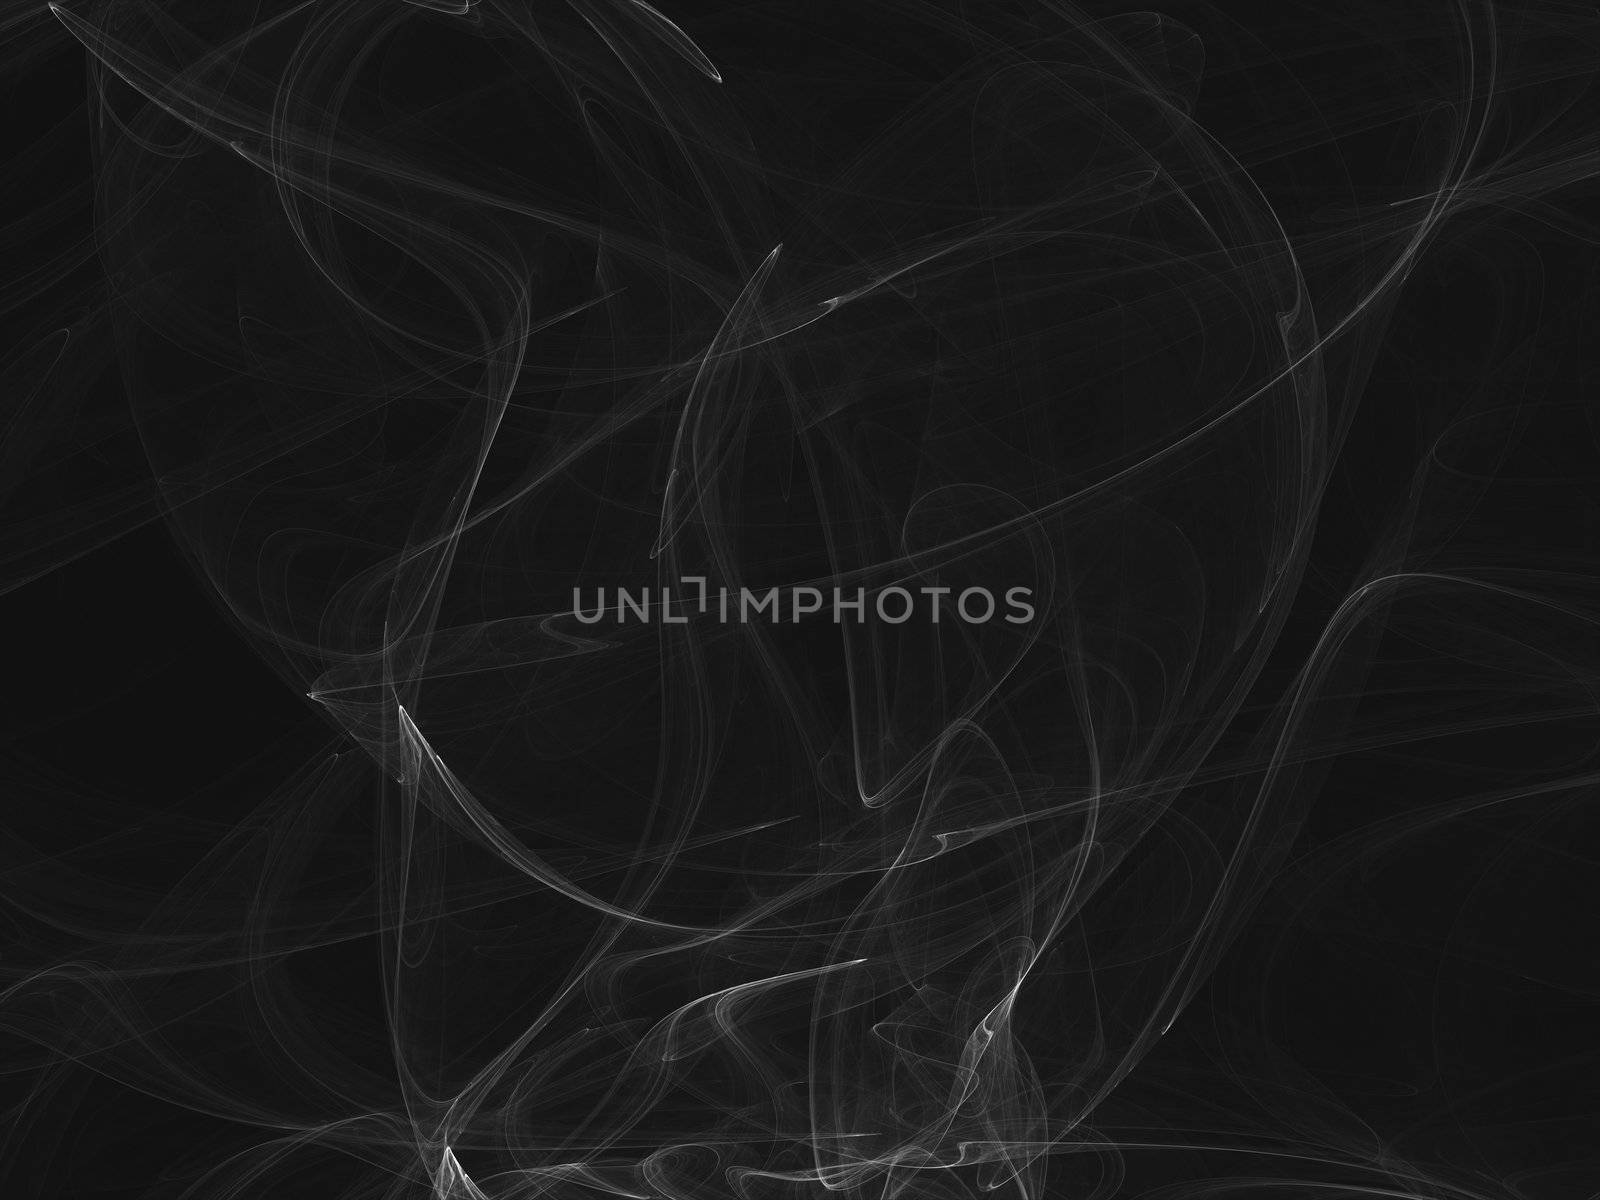 An illustration of a nice smoke background texture